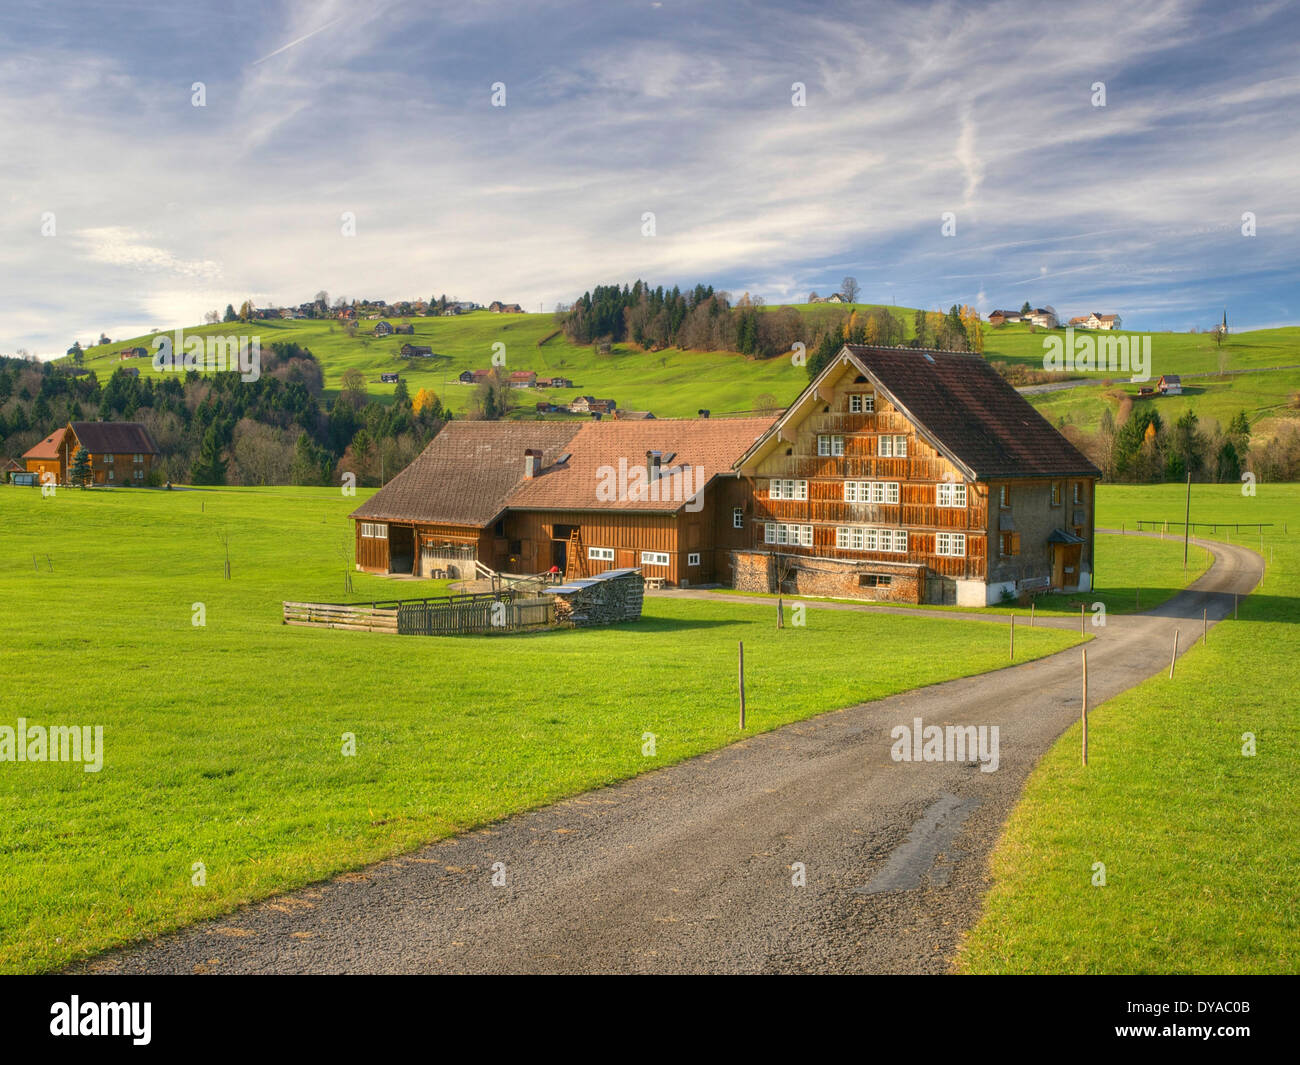 old-fashioned Appenzell Switzerland Europe farmhouse house autumn himmel sky idyl scenery landscape agriculture nature nosta Stock Photo